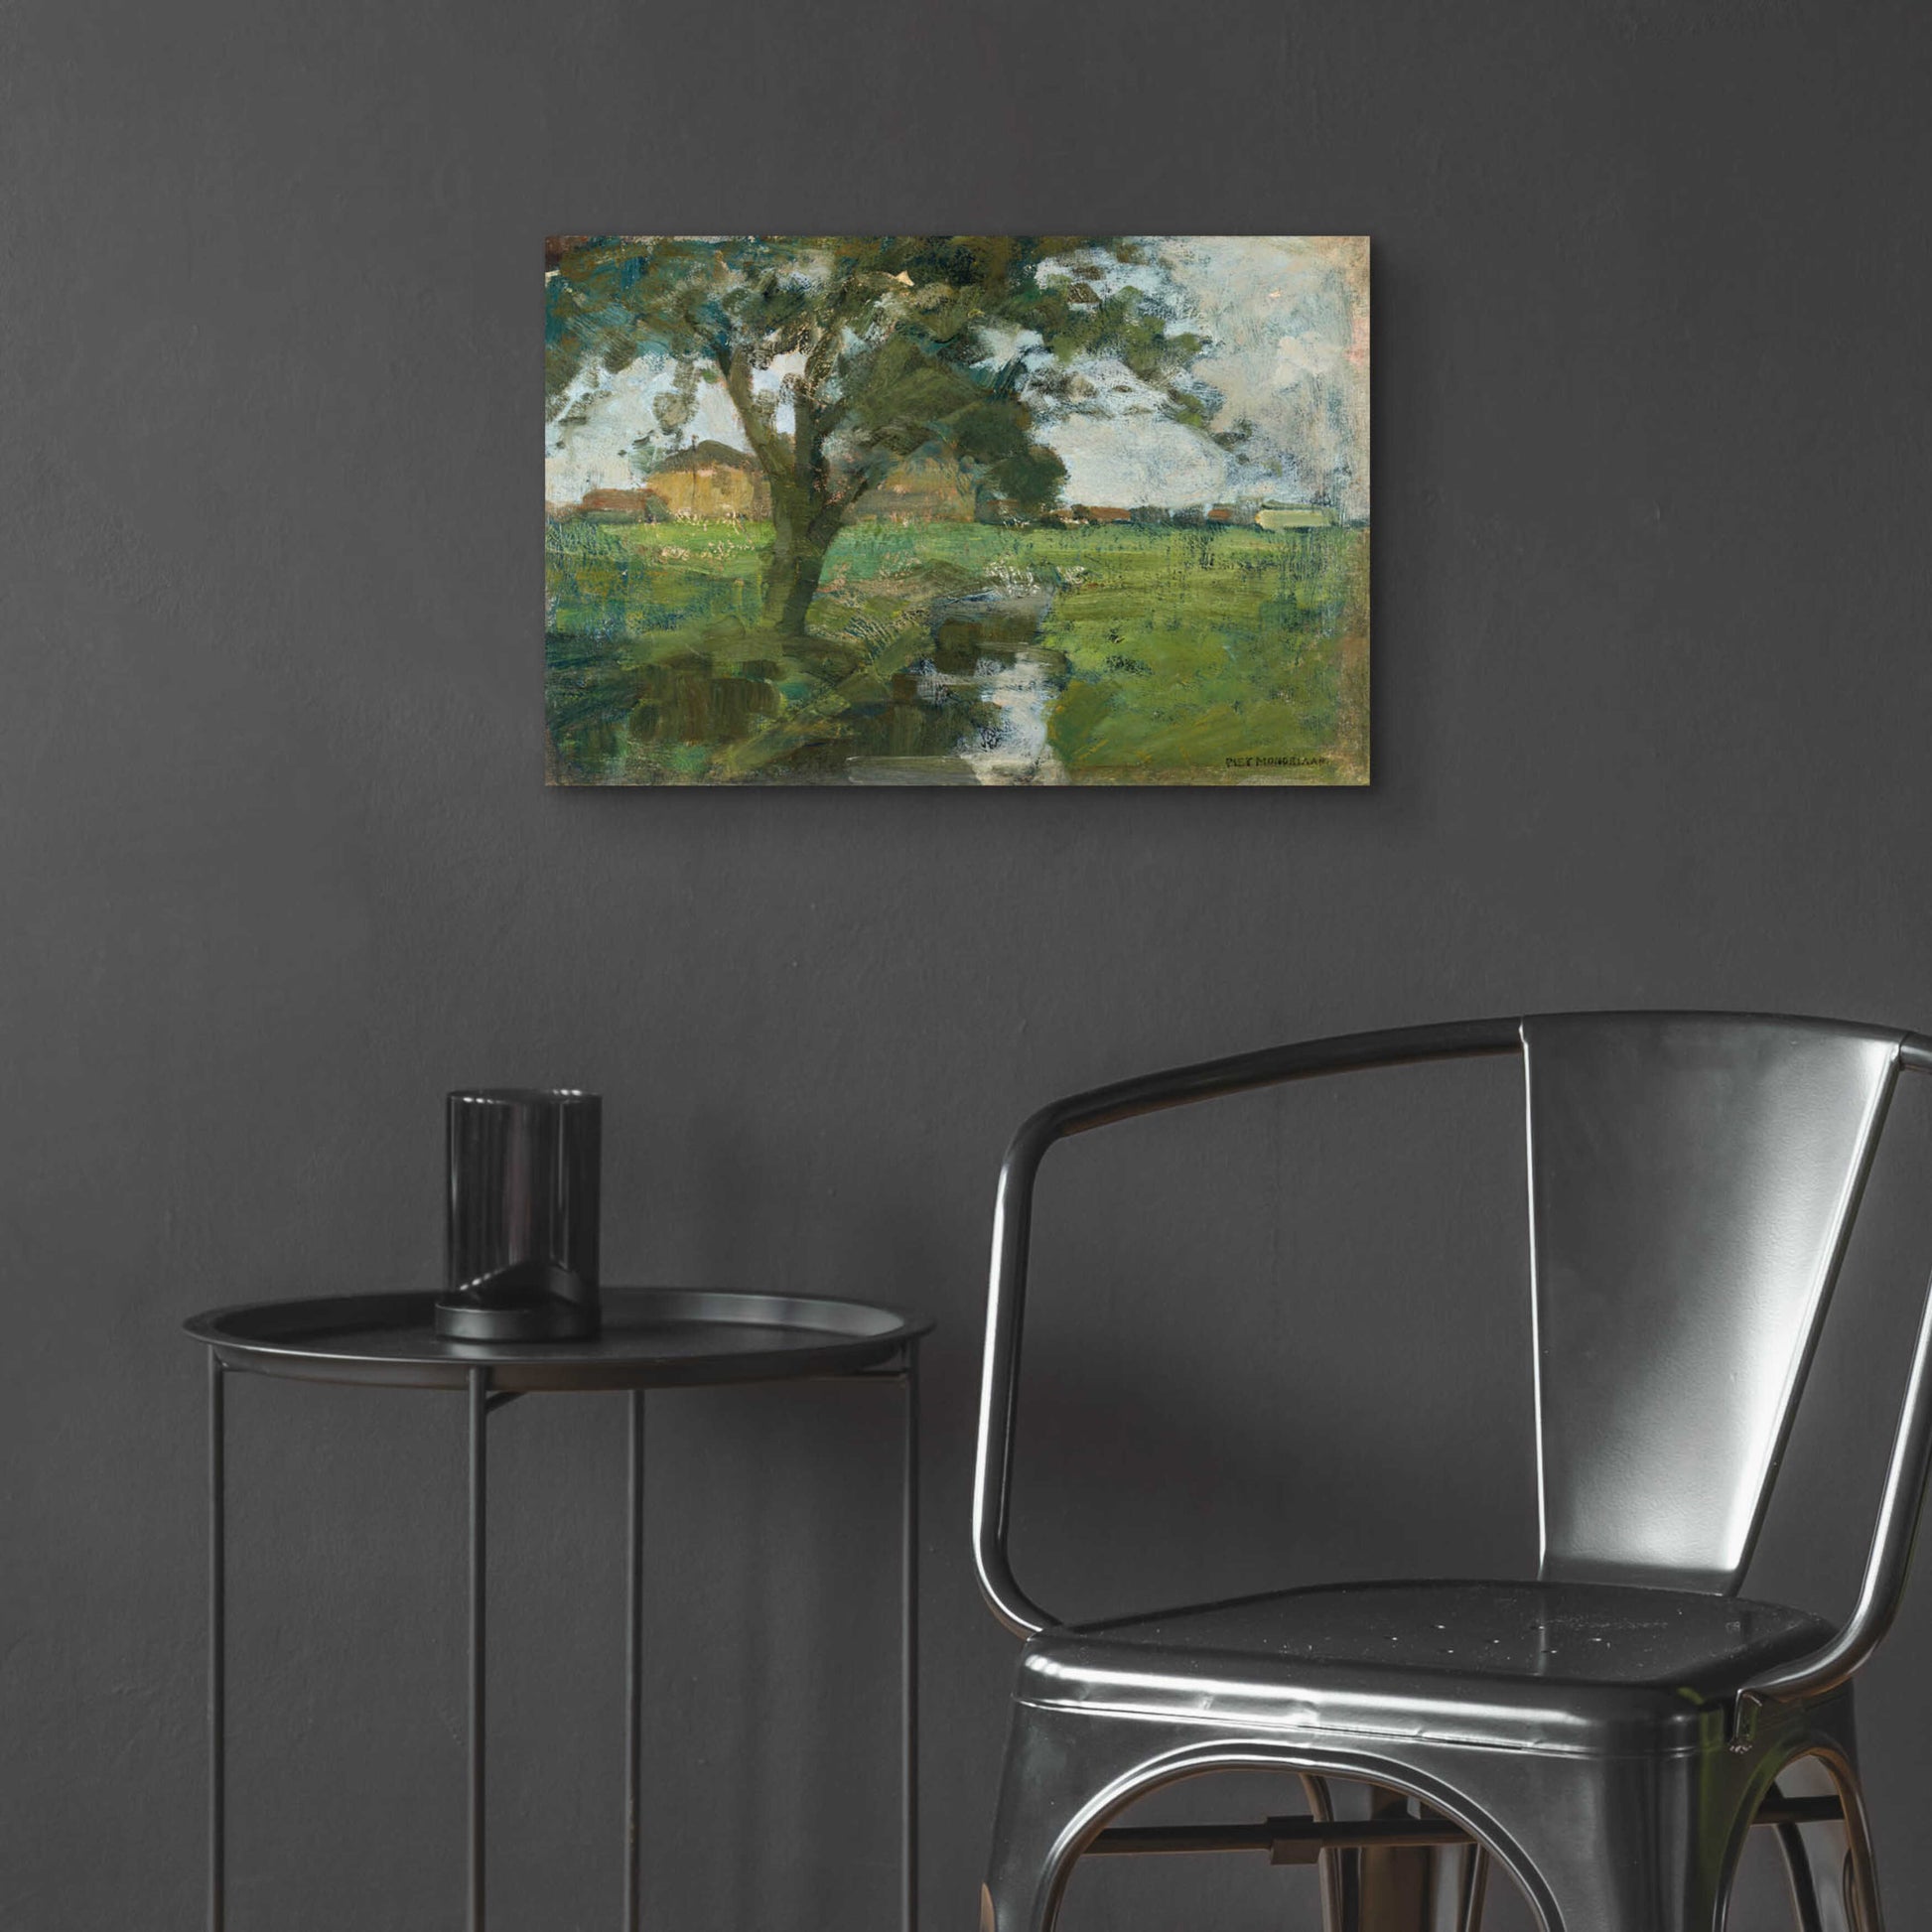 Epic Art 'Farm Settin with Foreground tree and Irrigation Ditch, 1900' by Piet Mondrian, Acrylic Glass Wall Art,24x16